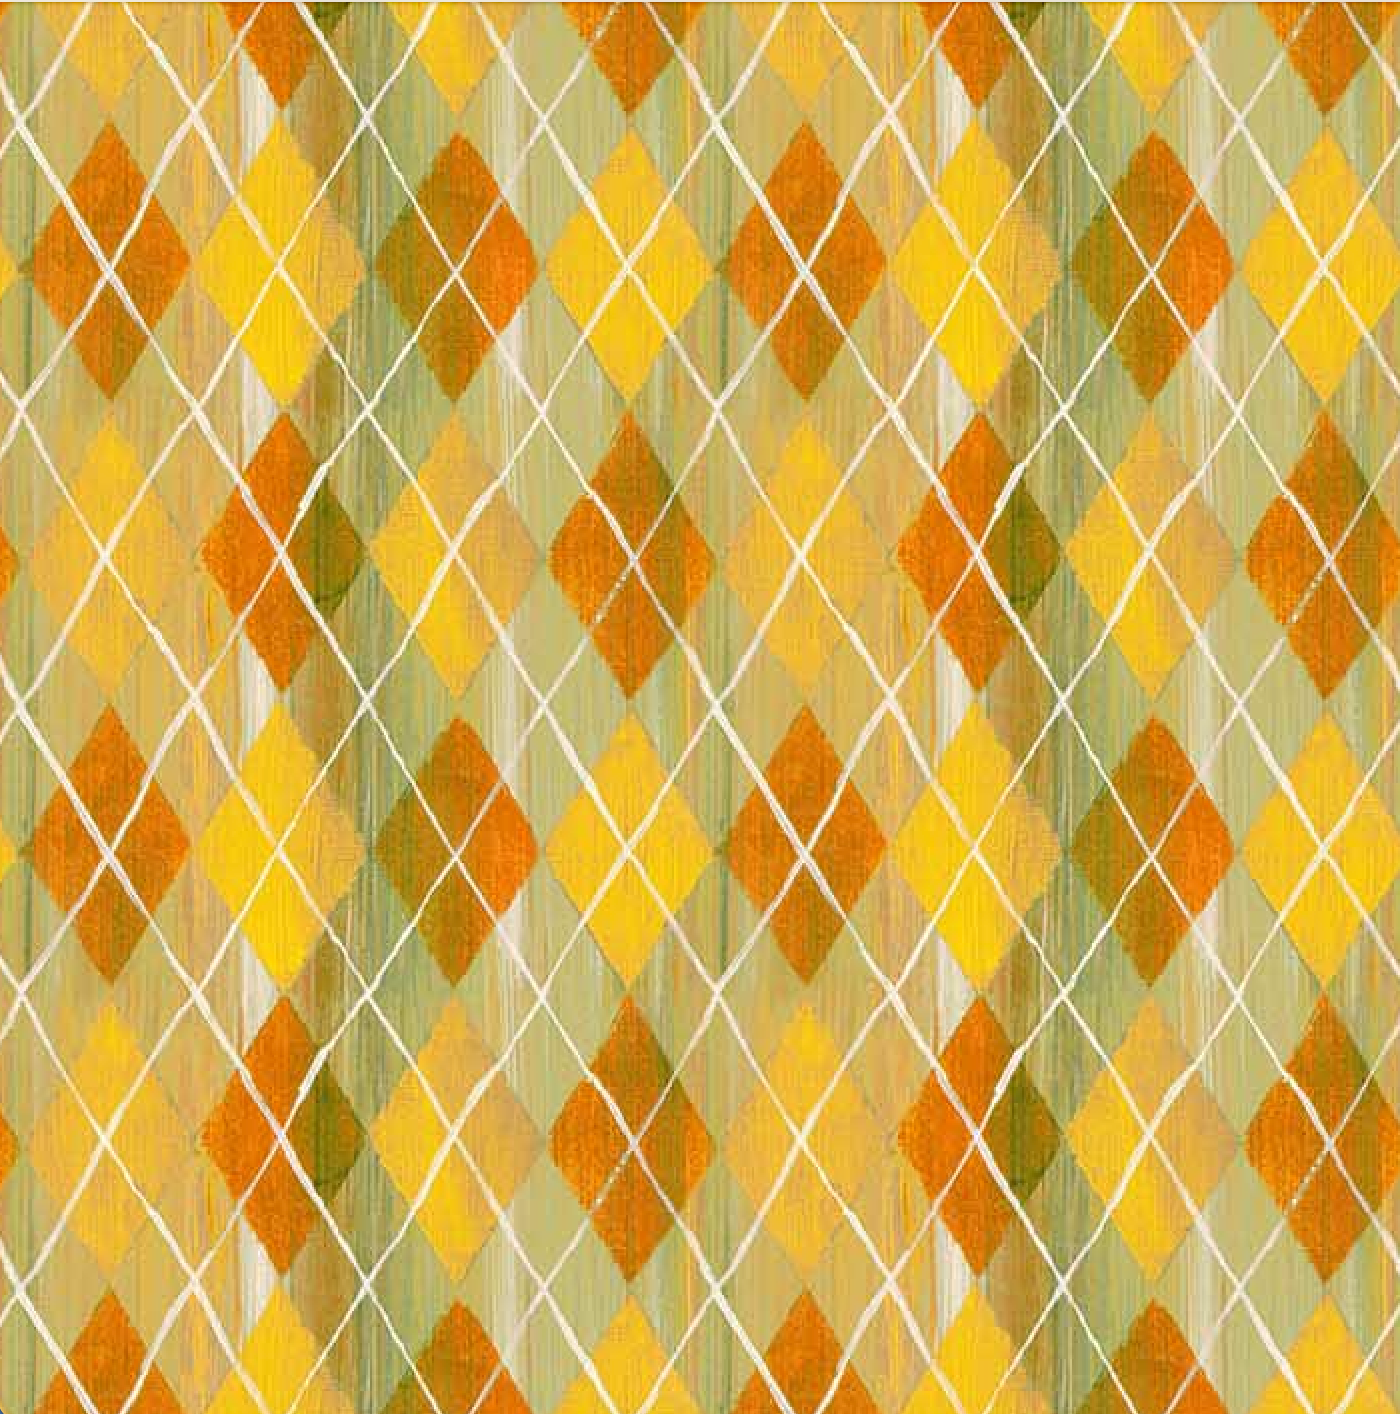 Dandelions and Daisies Quilt Fabric - Argyle in Sunflower Yellow/Multi - 40051-54